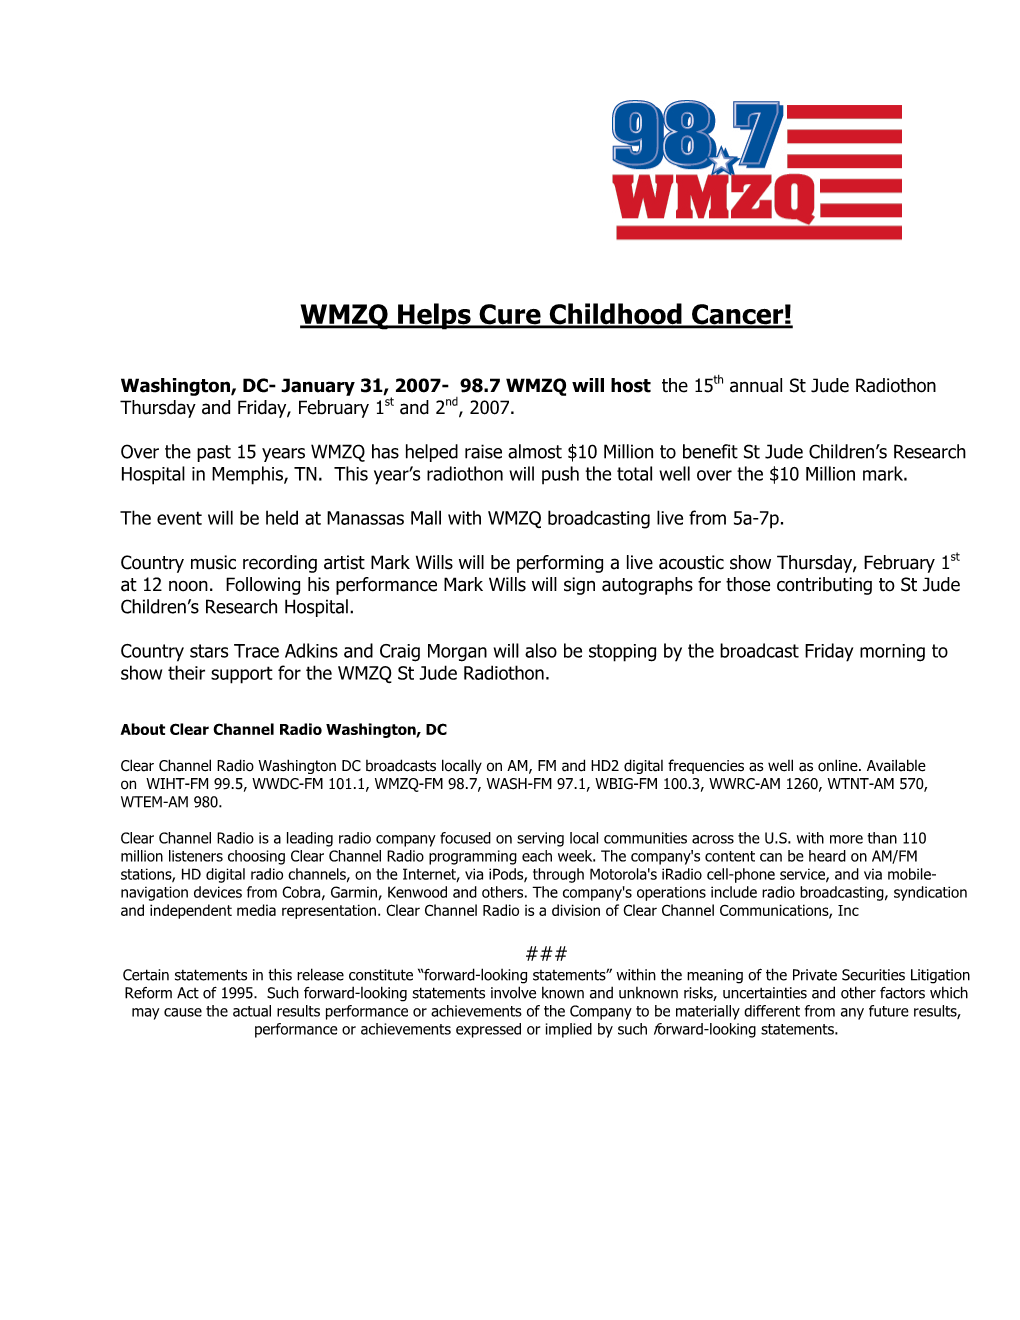 WMZQ Helps Cure Childhood Cancer!